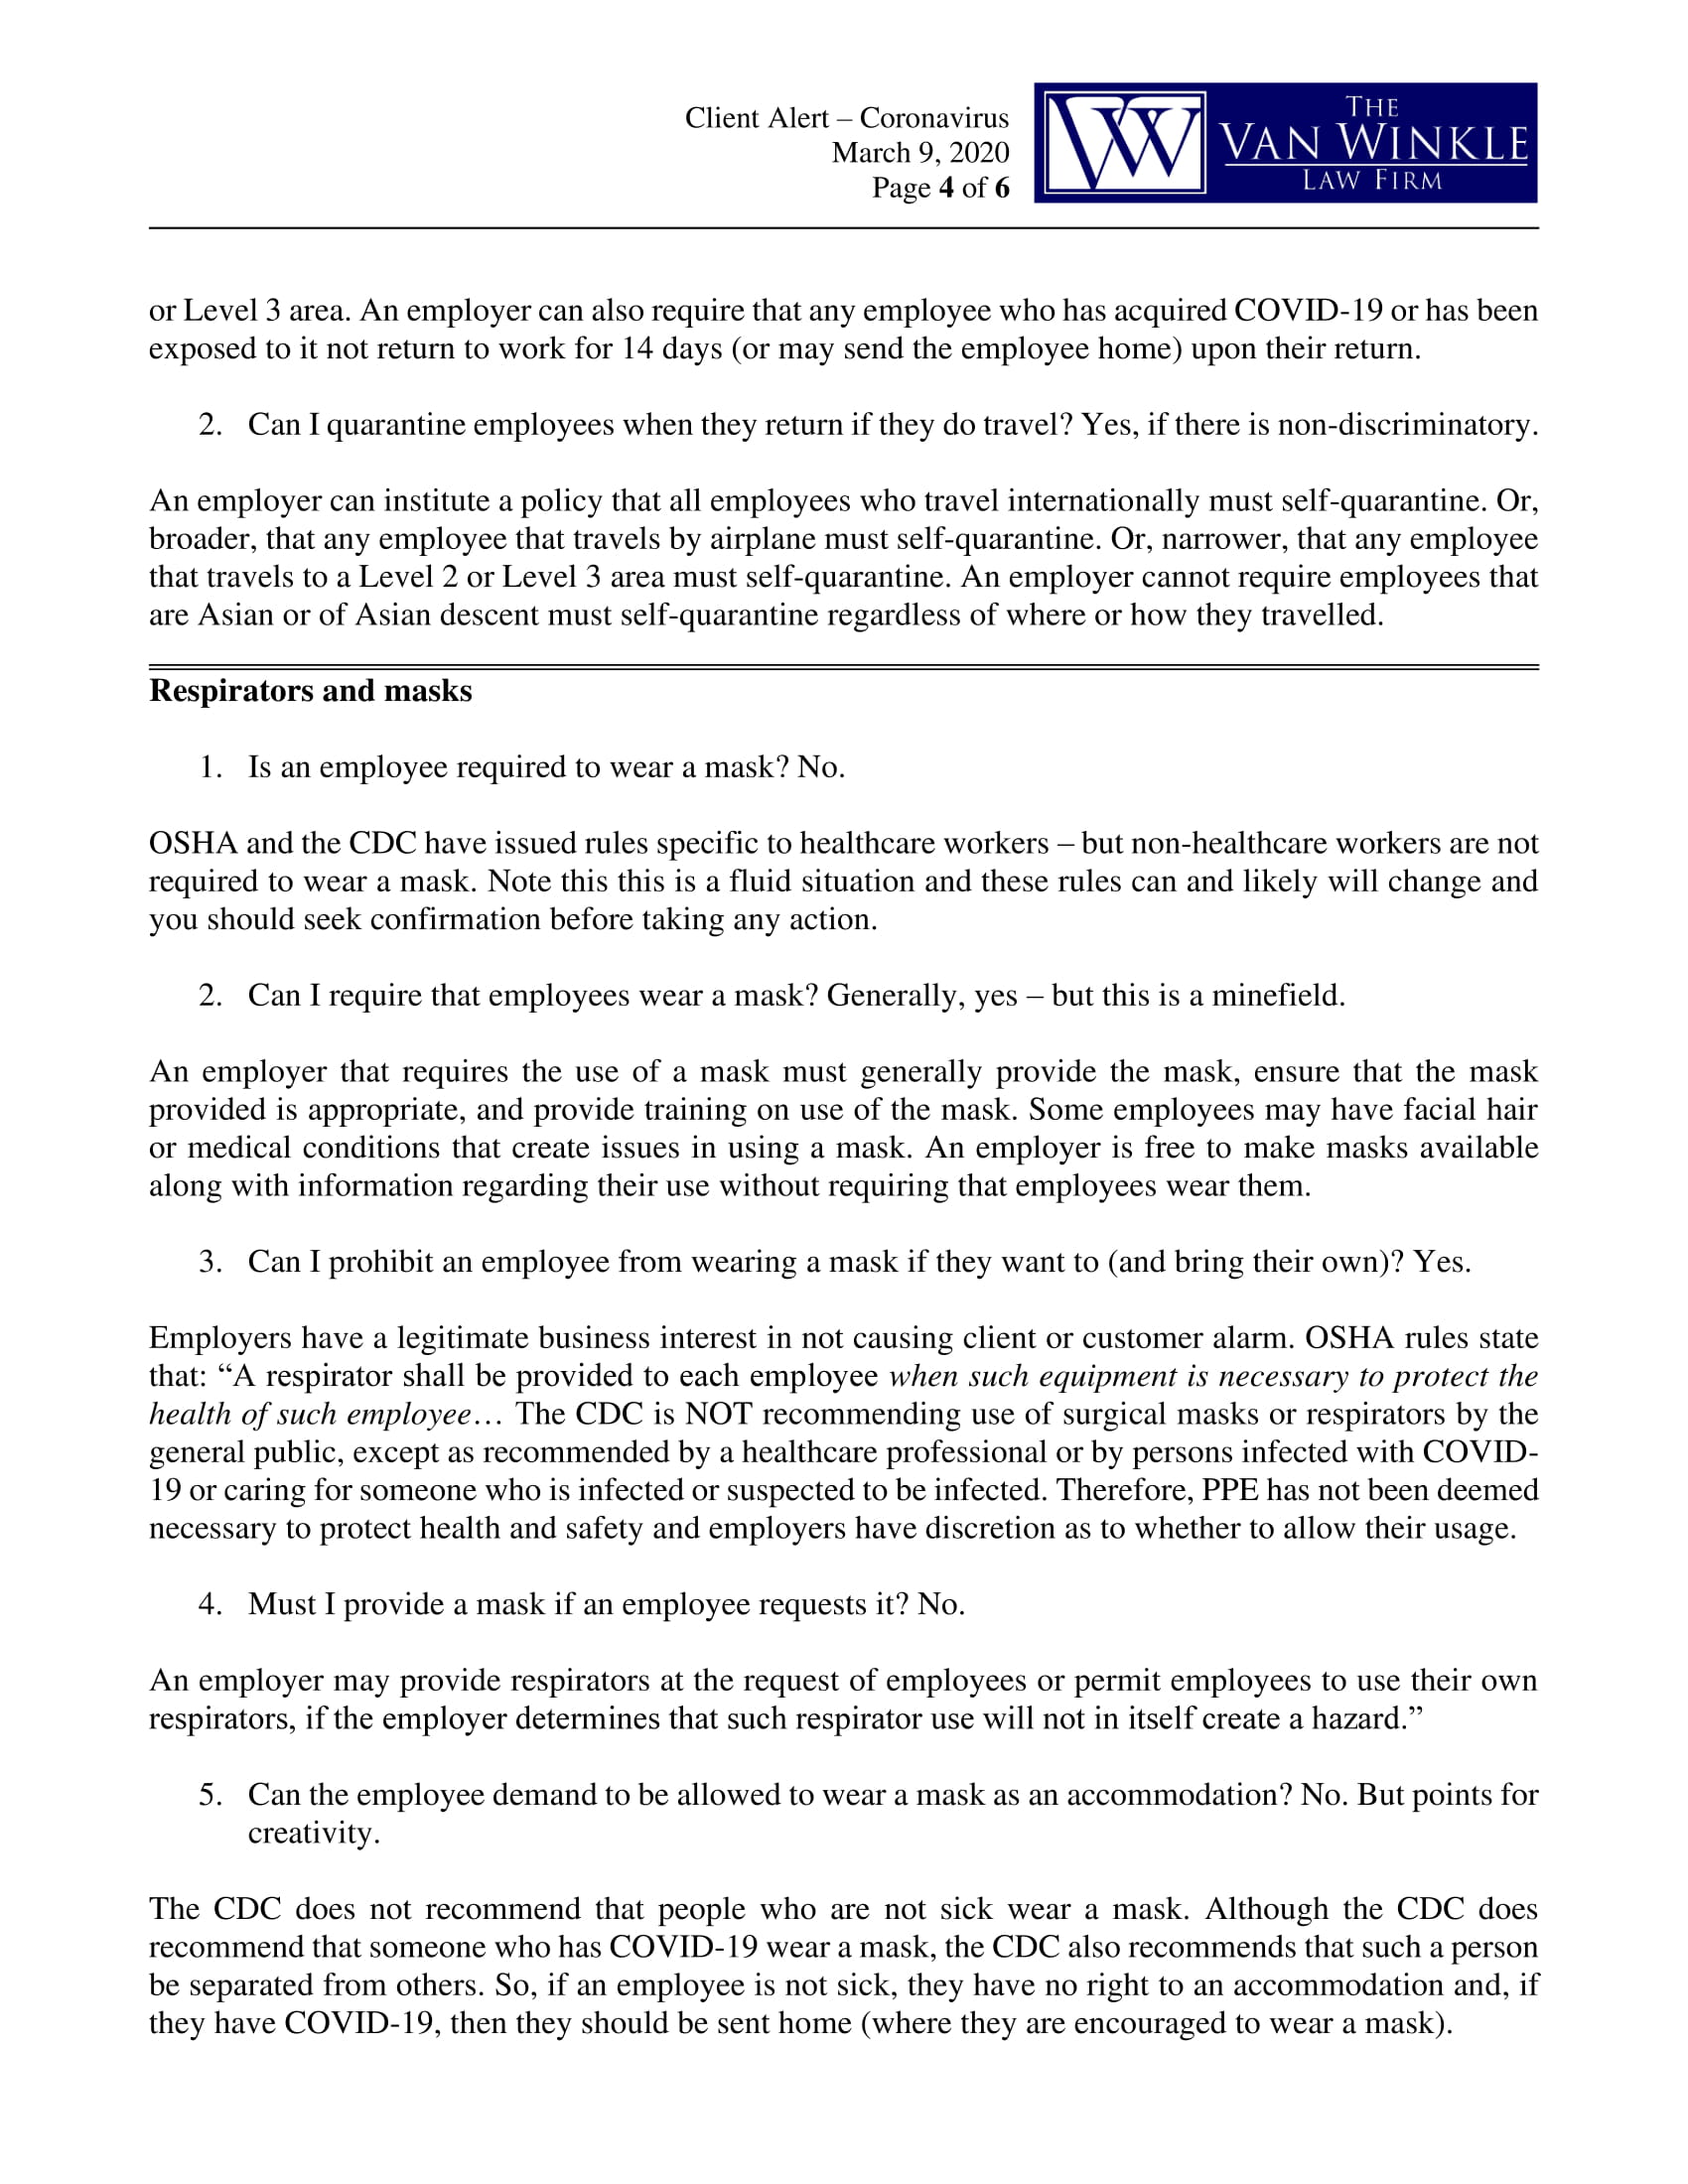 Employment Law Page 4